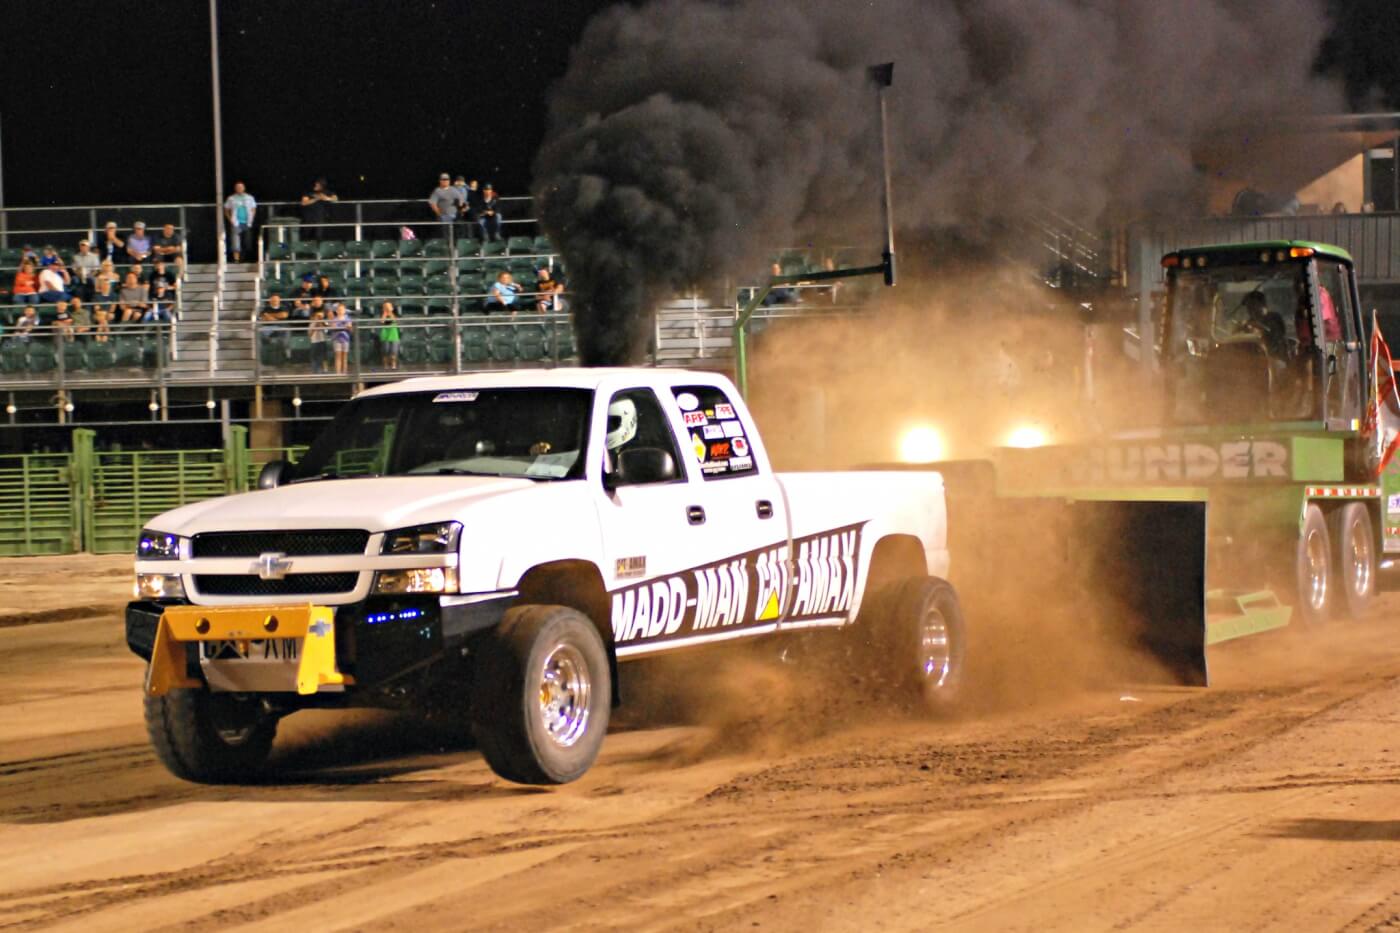 Dan Madden’s ‘Cat-A-Max’ twin turbo Duramax placed second in the 3.2 Inducer class with a strong 275.5-ft. pull. Had he been able to keep all six tires planted to the dirt, first place may have been within reach.